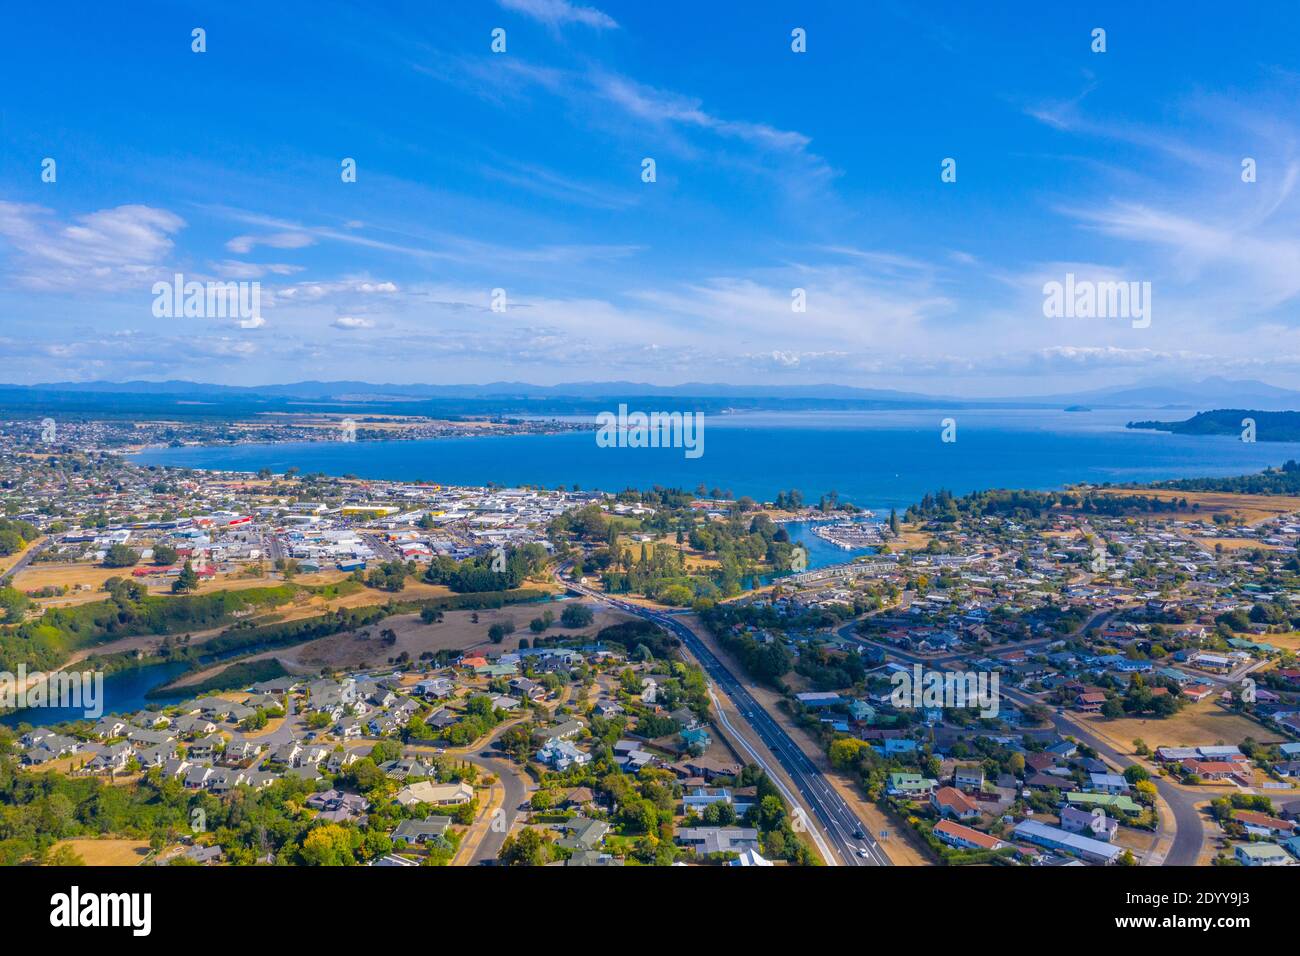 Aerial view of Taupo town in New Zealand Stock Photo